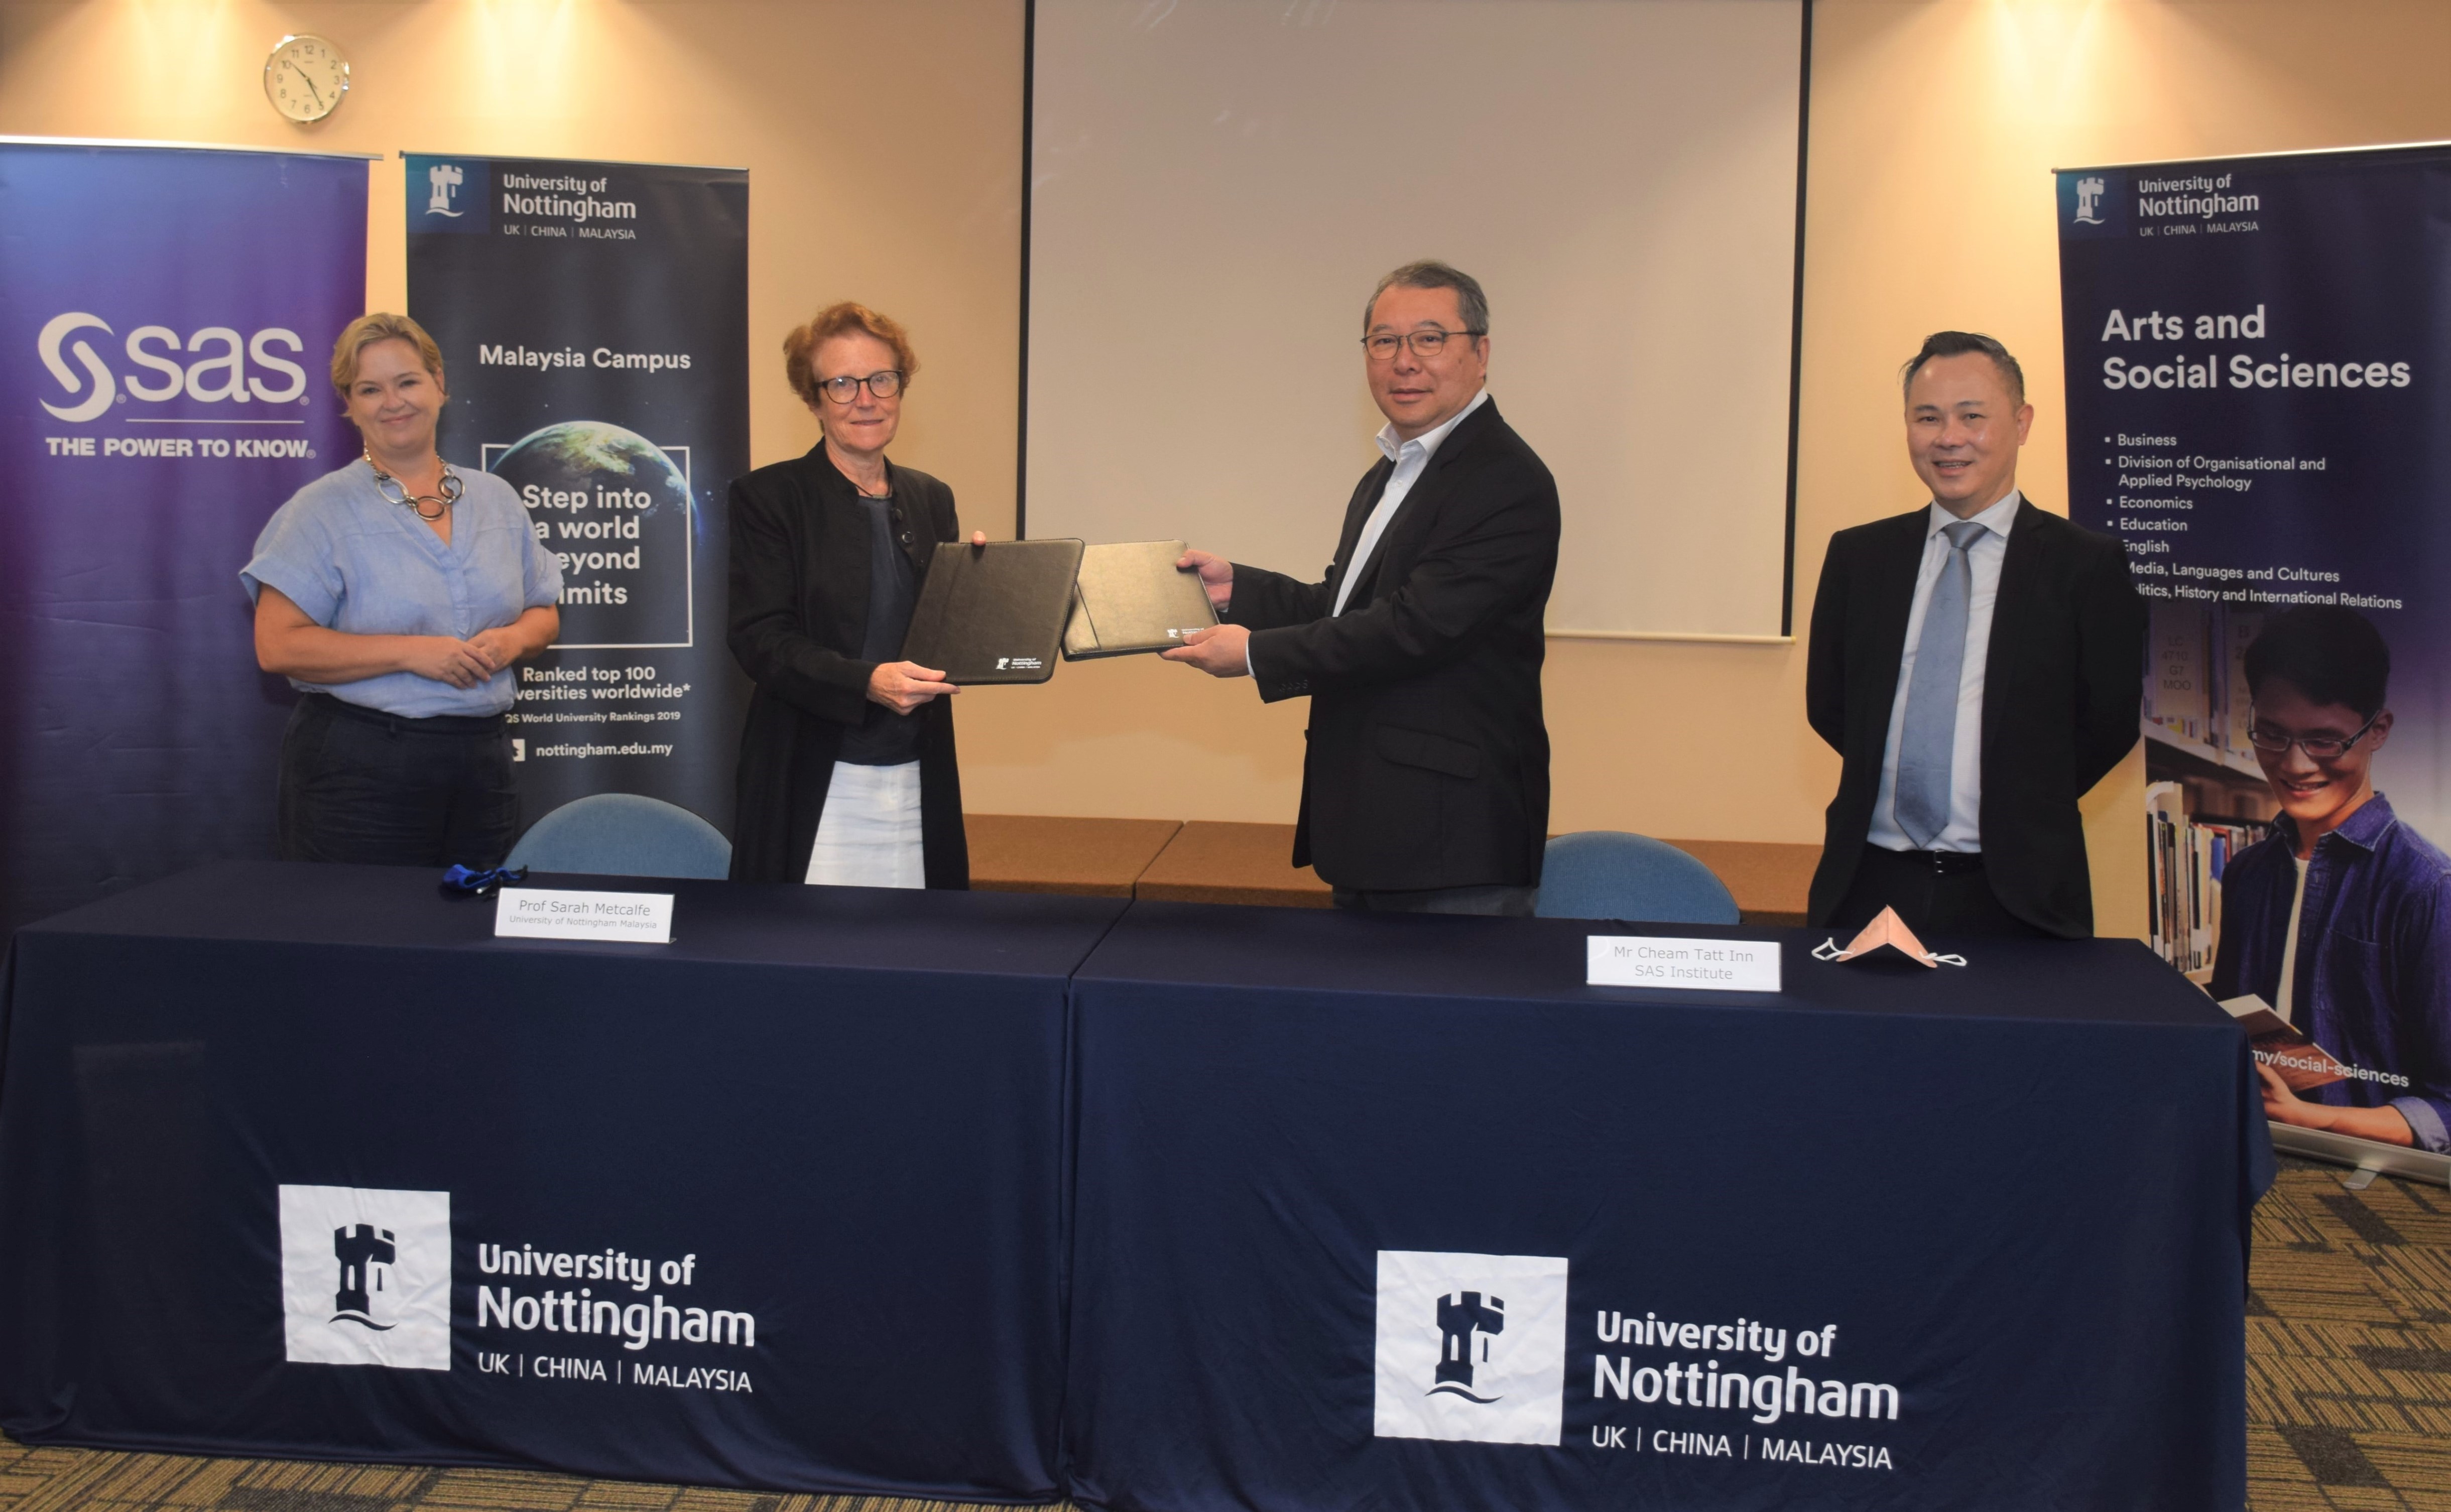 Prof Sarah Metcalf, CEO of University of Nottingham (L) and Cheam Tat Inn, MD of SAS Malaysia and other officials in the signing ceremonty